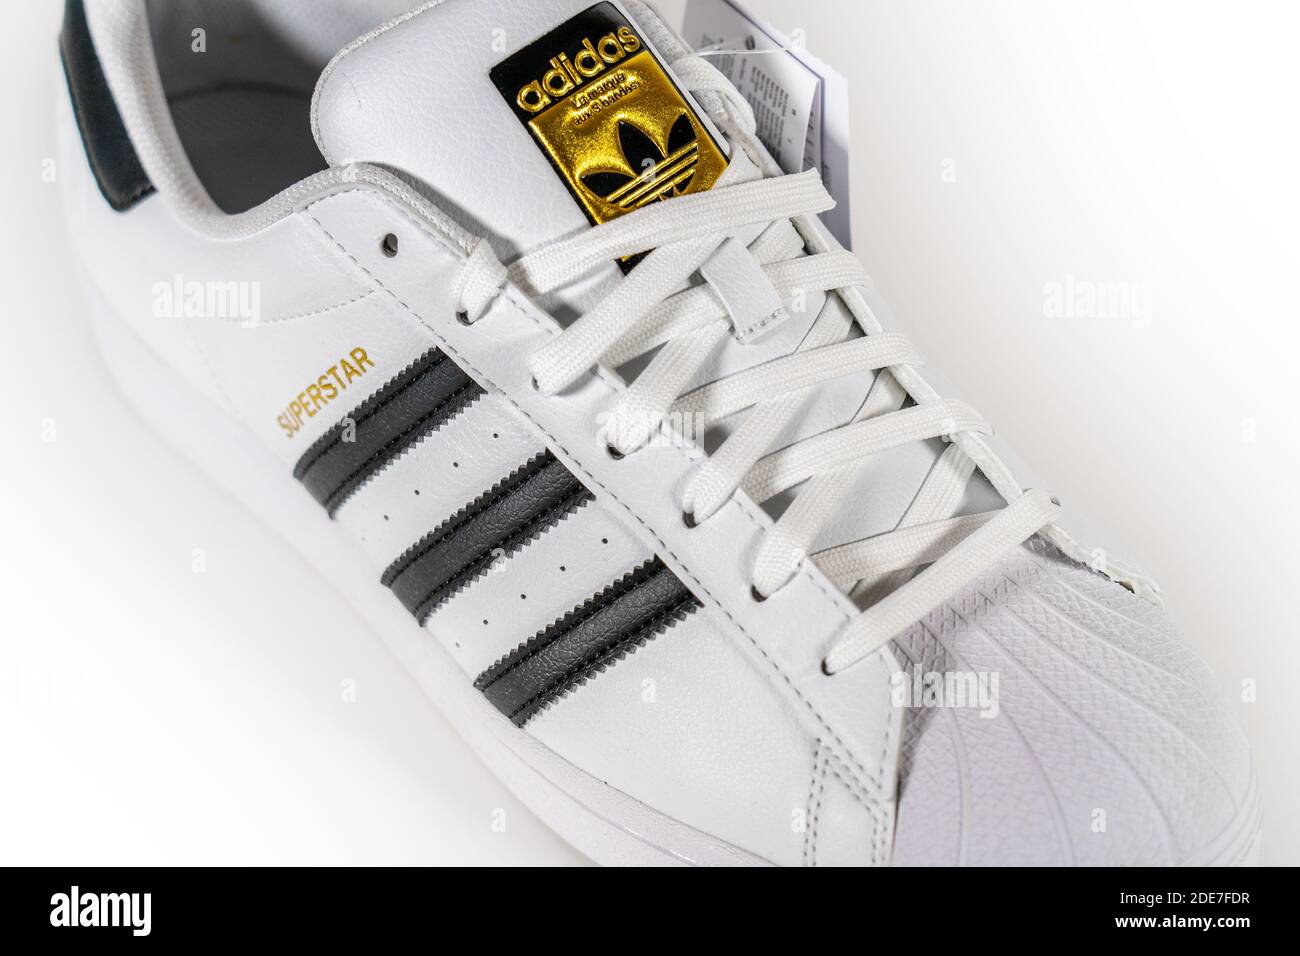 Adidas Superstar - famous sneaker model by German of sports equipment and accessories Adidas. Retro basketball shoe, in production since 1969 - Moscow, Russia - November 2020 Stock Photo - Alamy